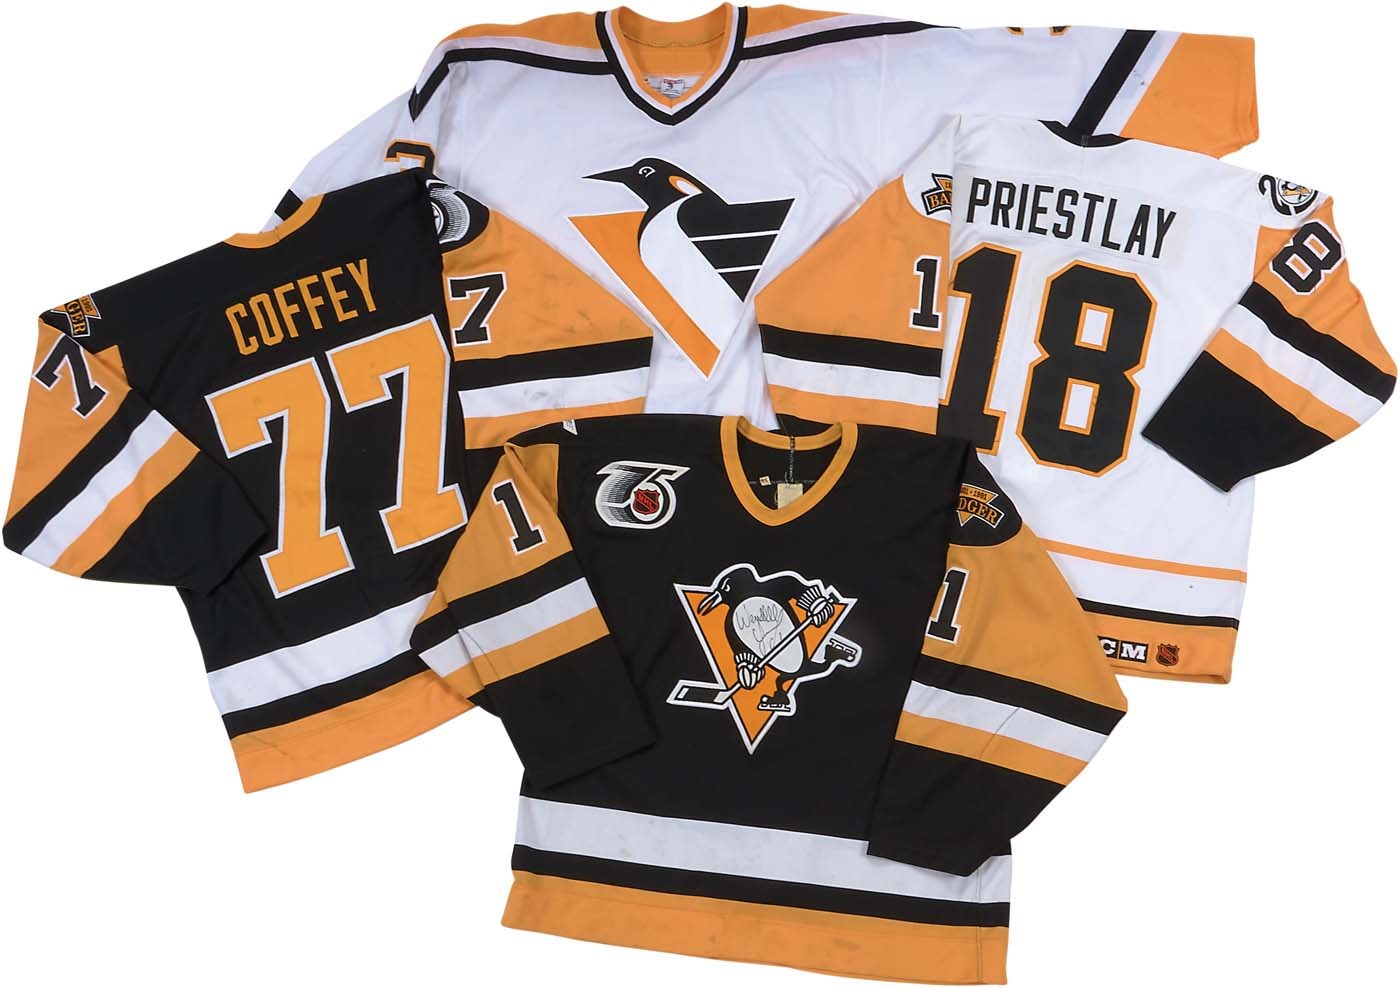 1990s-2000s Pittsburgh Penguins Game Worn Jerseys (4)